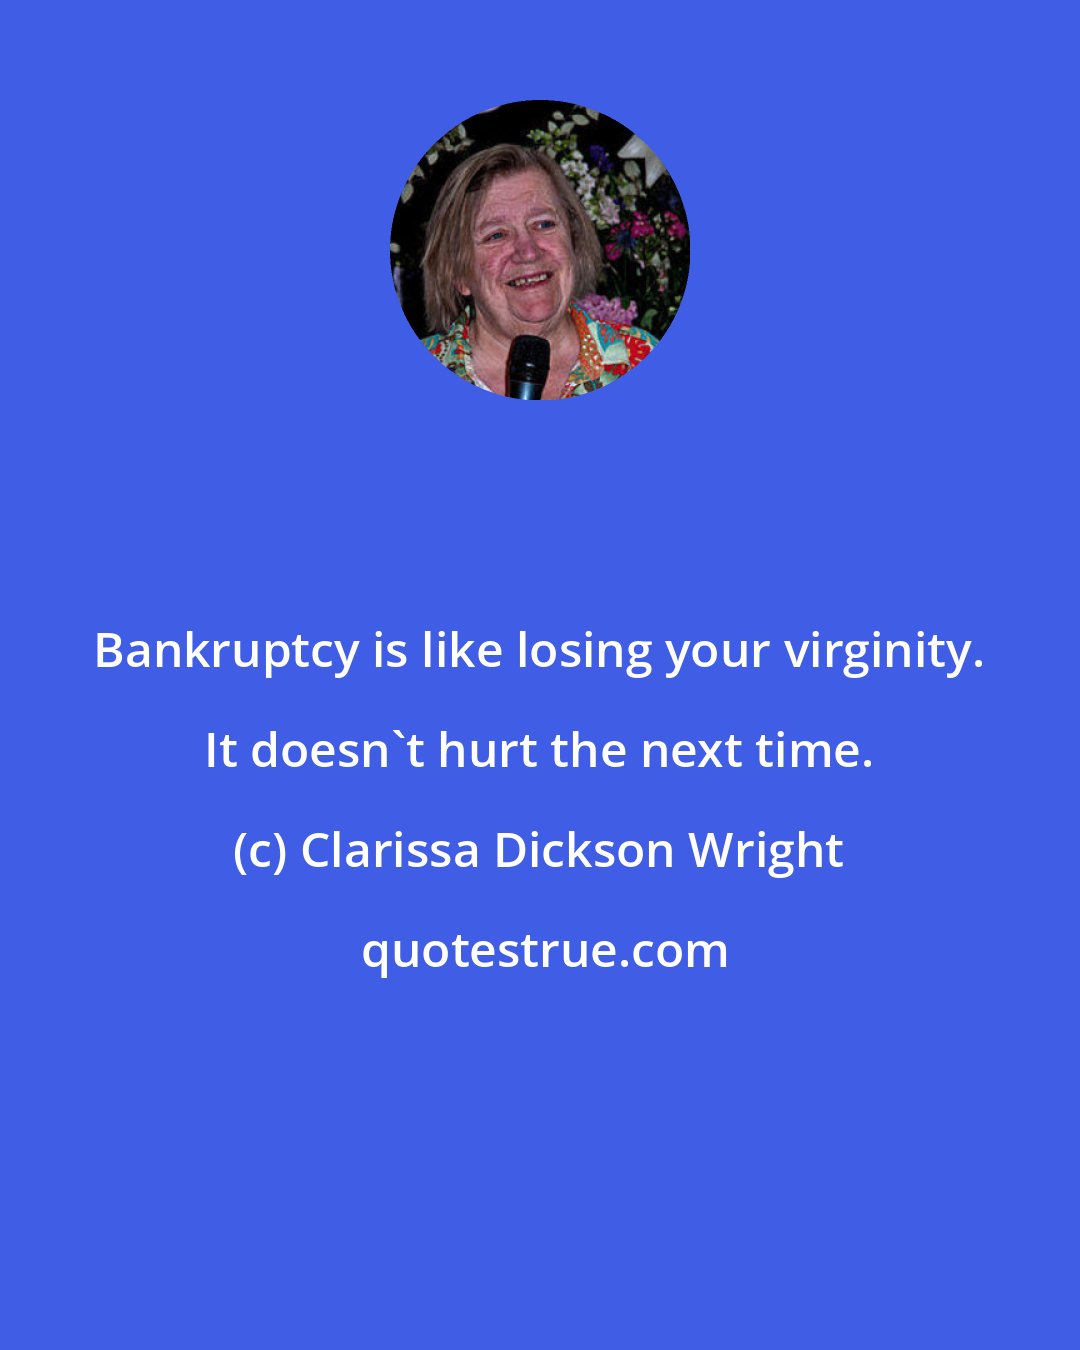 Clarissa Dickson Wright: Bankruptcy is like losing your virginity. It doesn't hurt the next time.